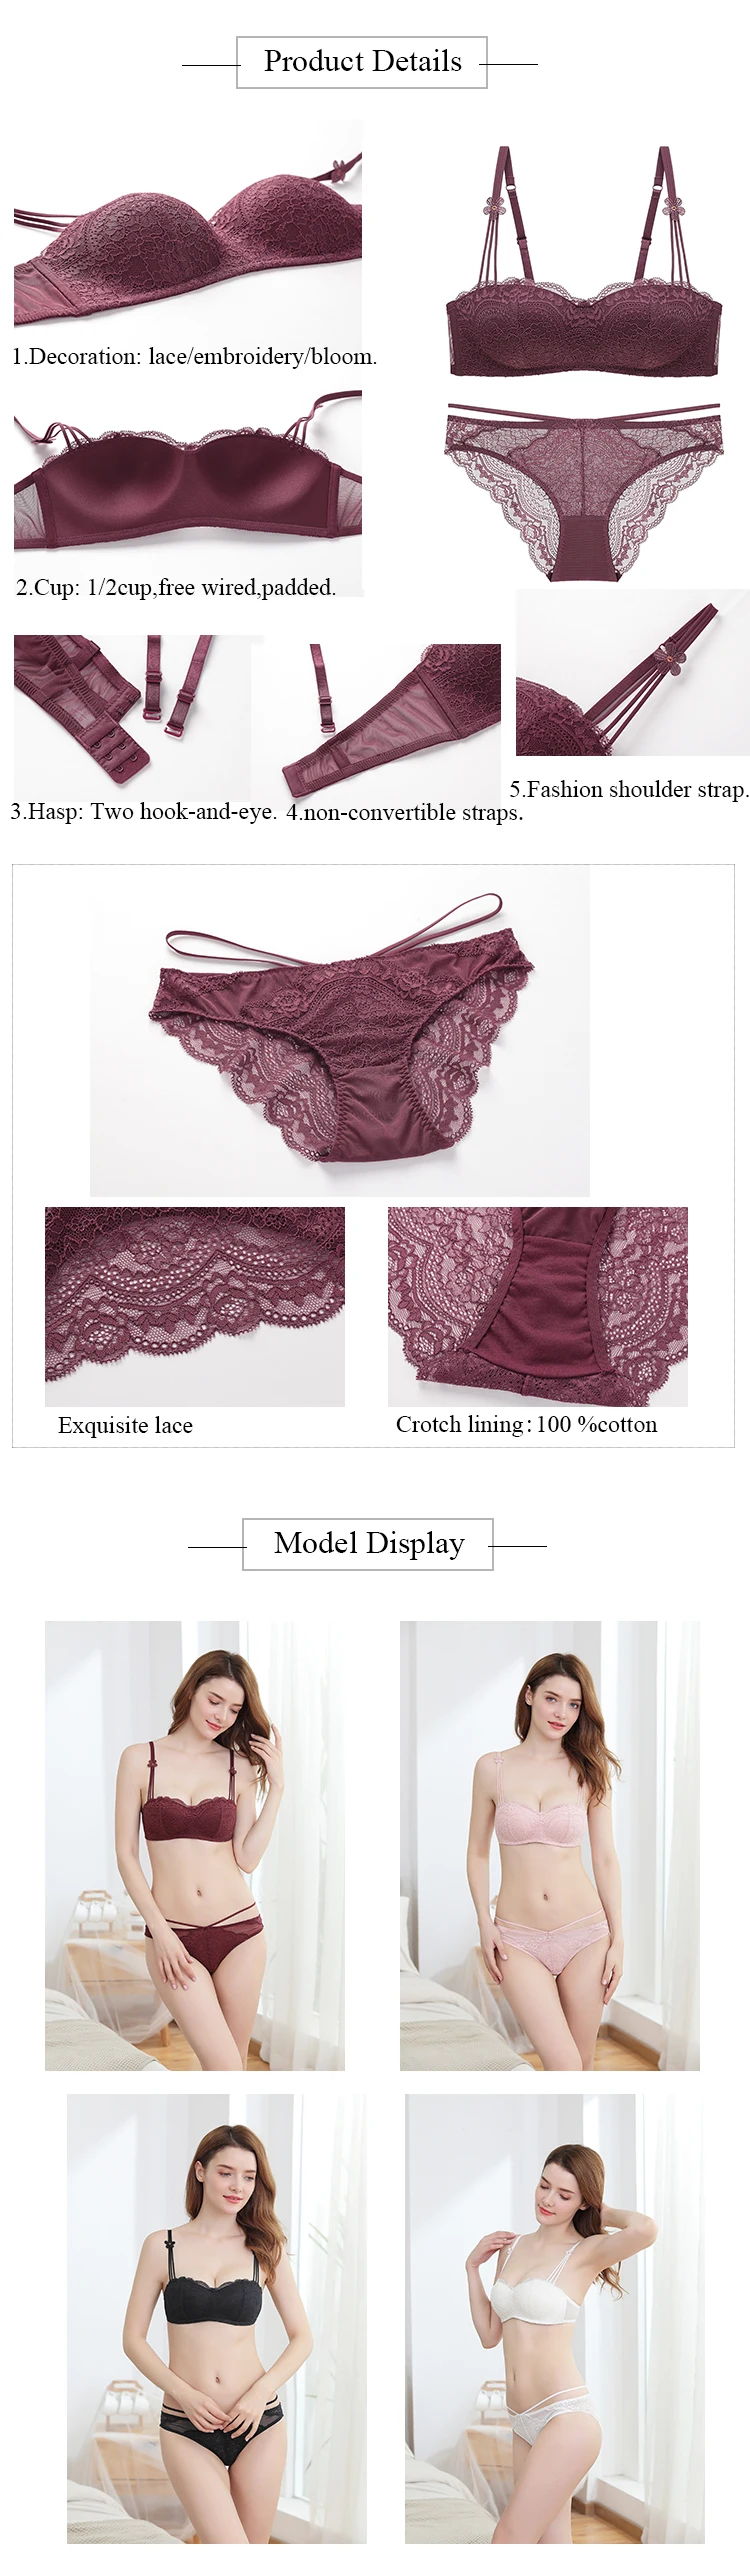 Lace Lady Underwear Name Brand Sexy